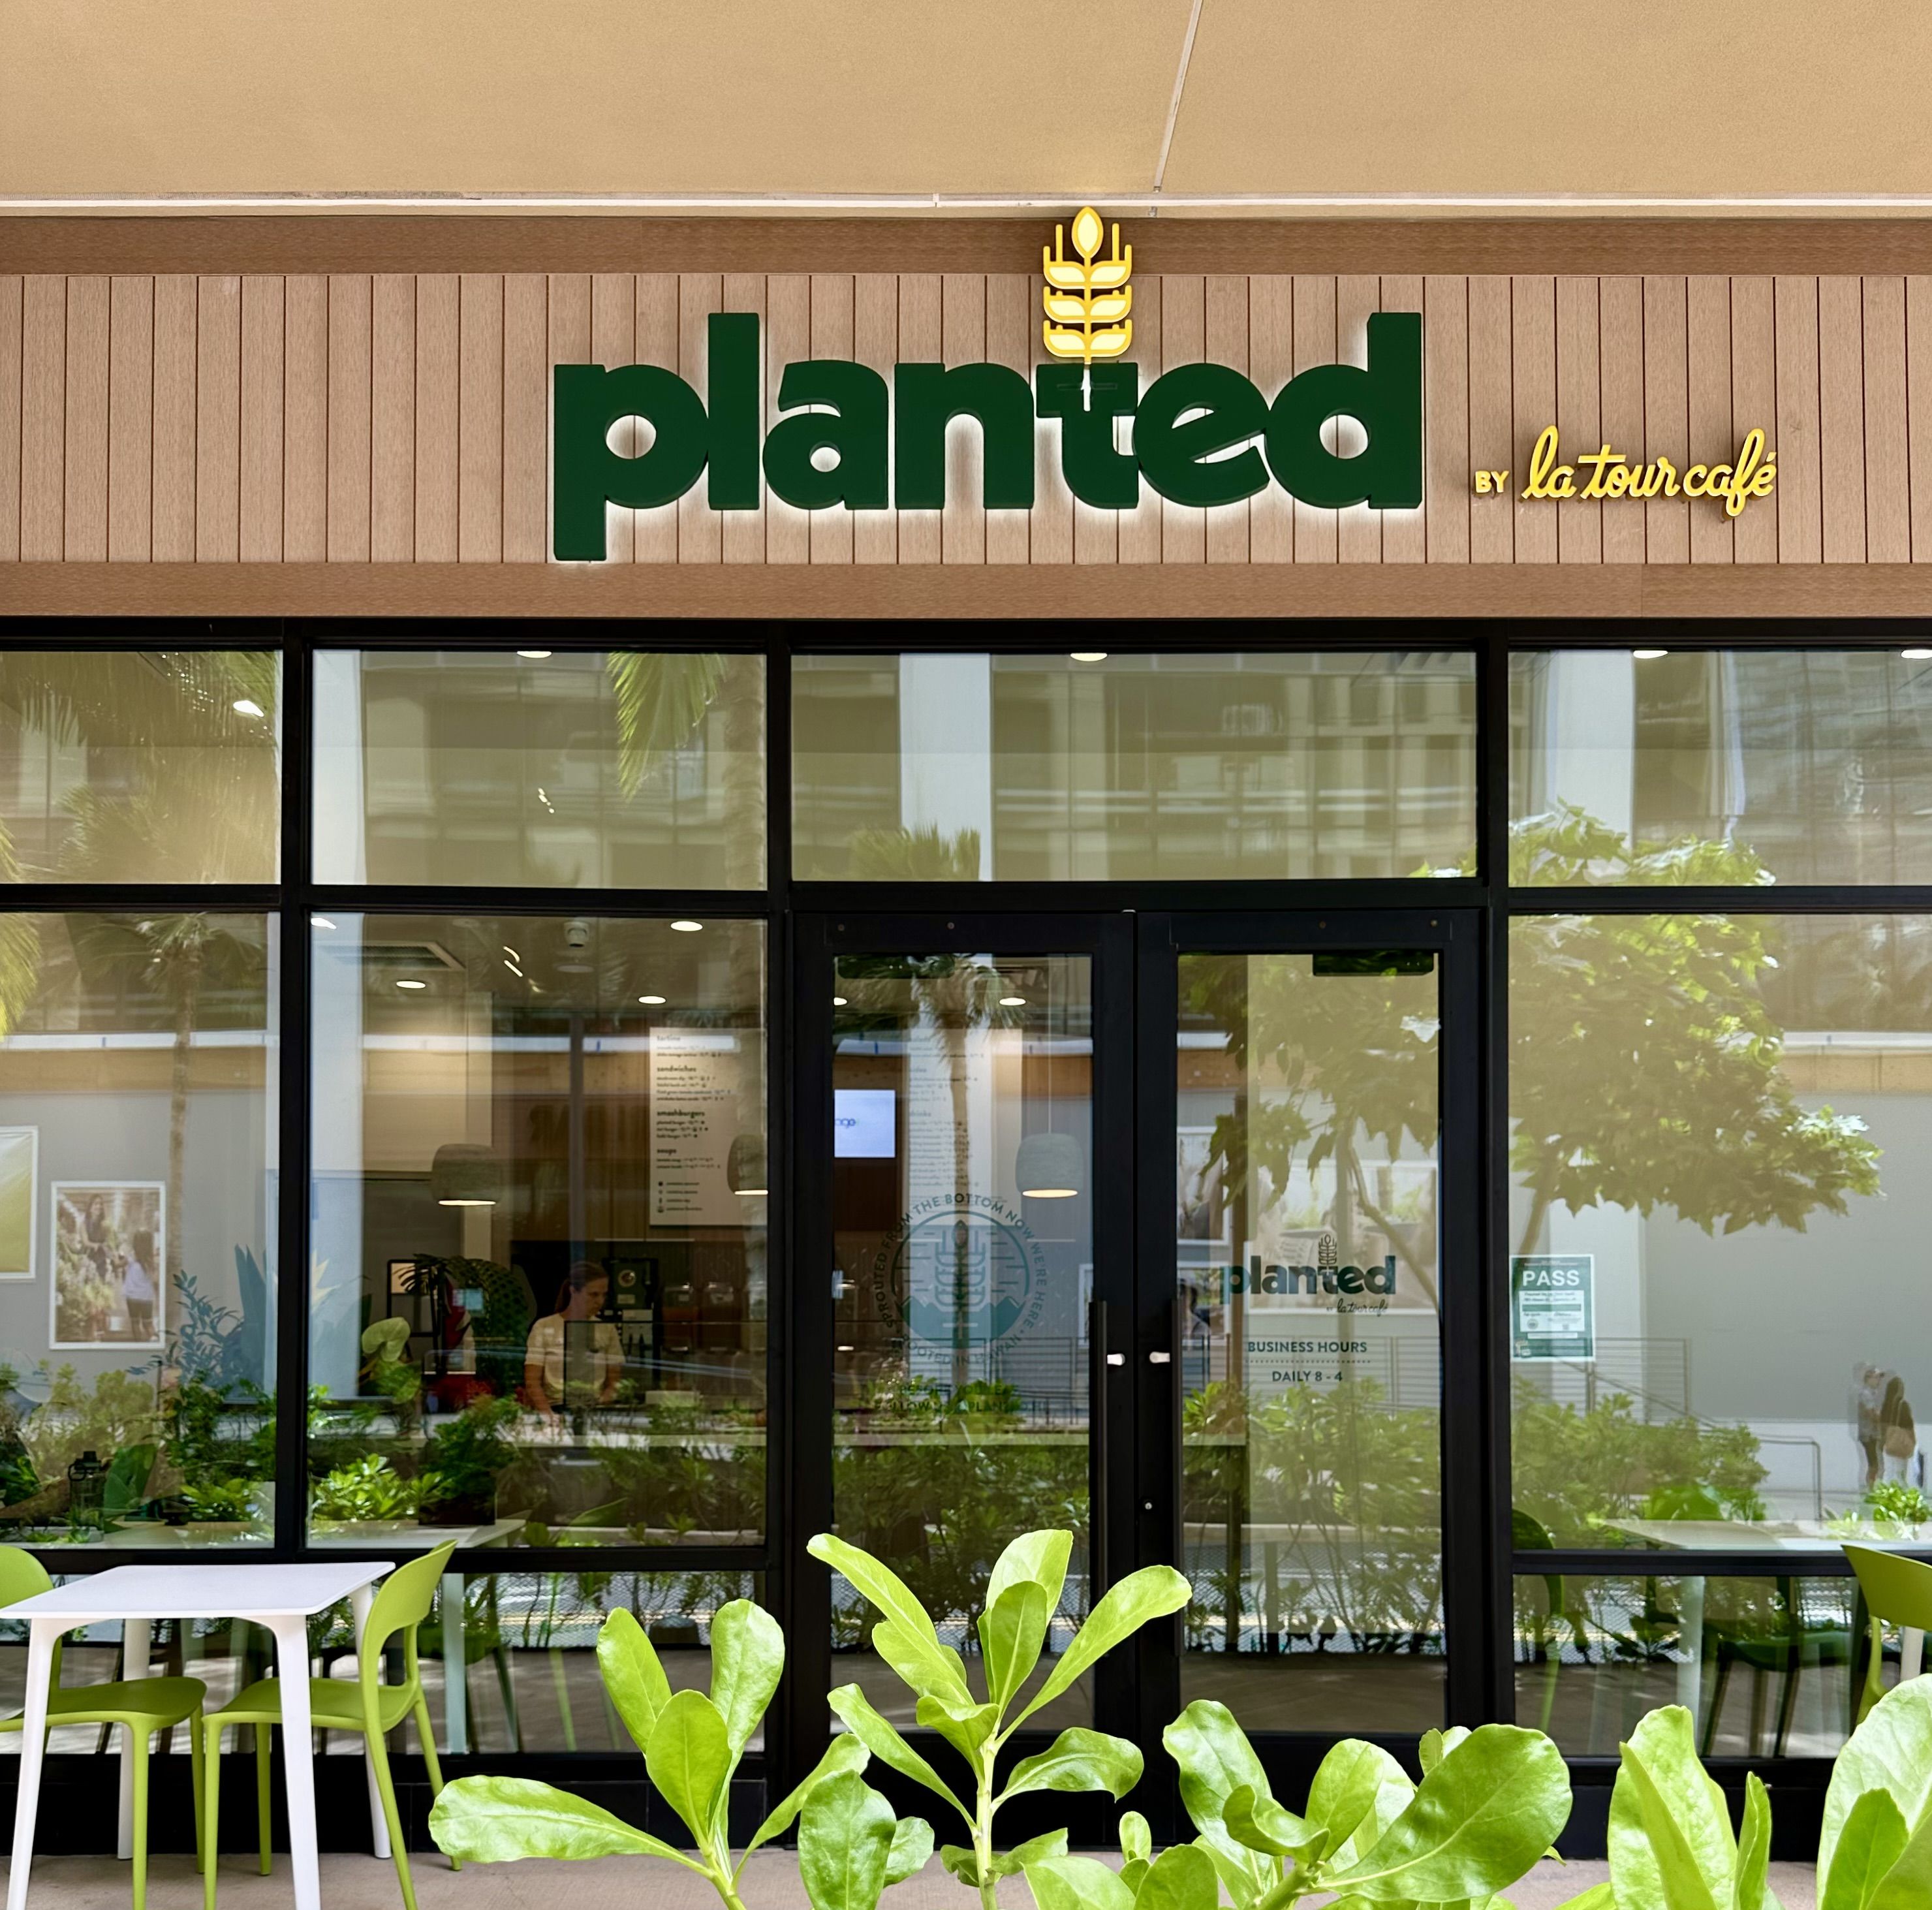 Located at the ground level of ‘A‘ali‘i Shops, Planted by La Tour Café brings plant-based flavors to Honolulu.